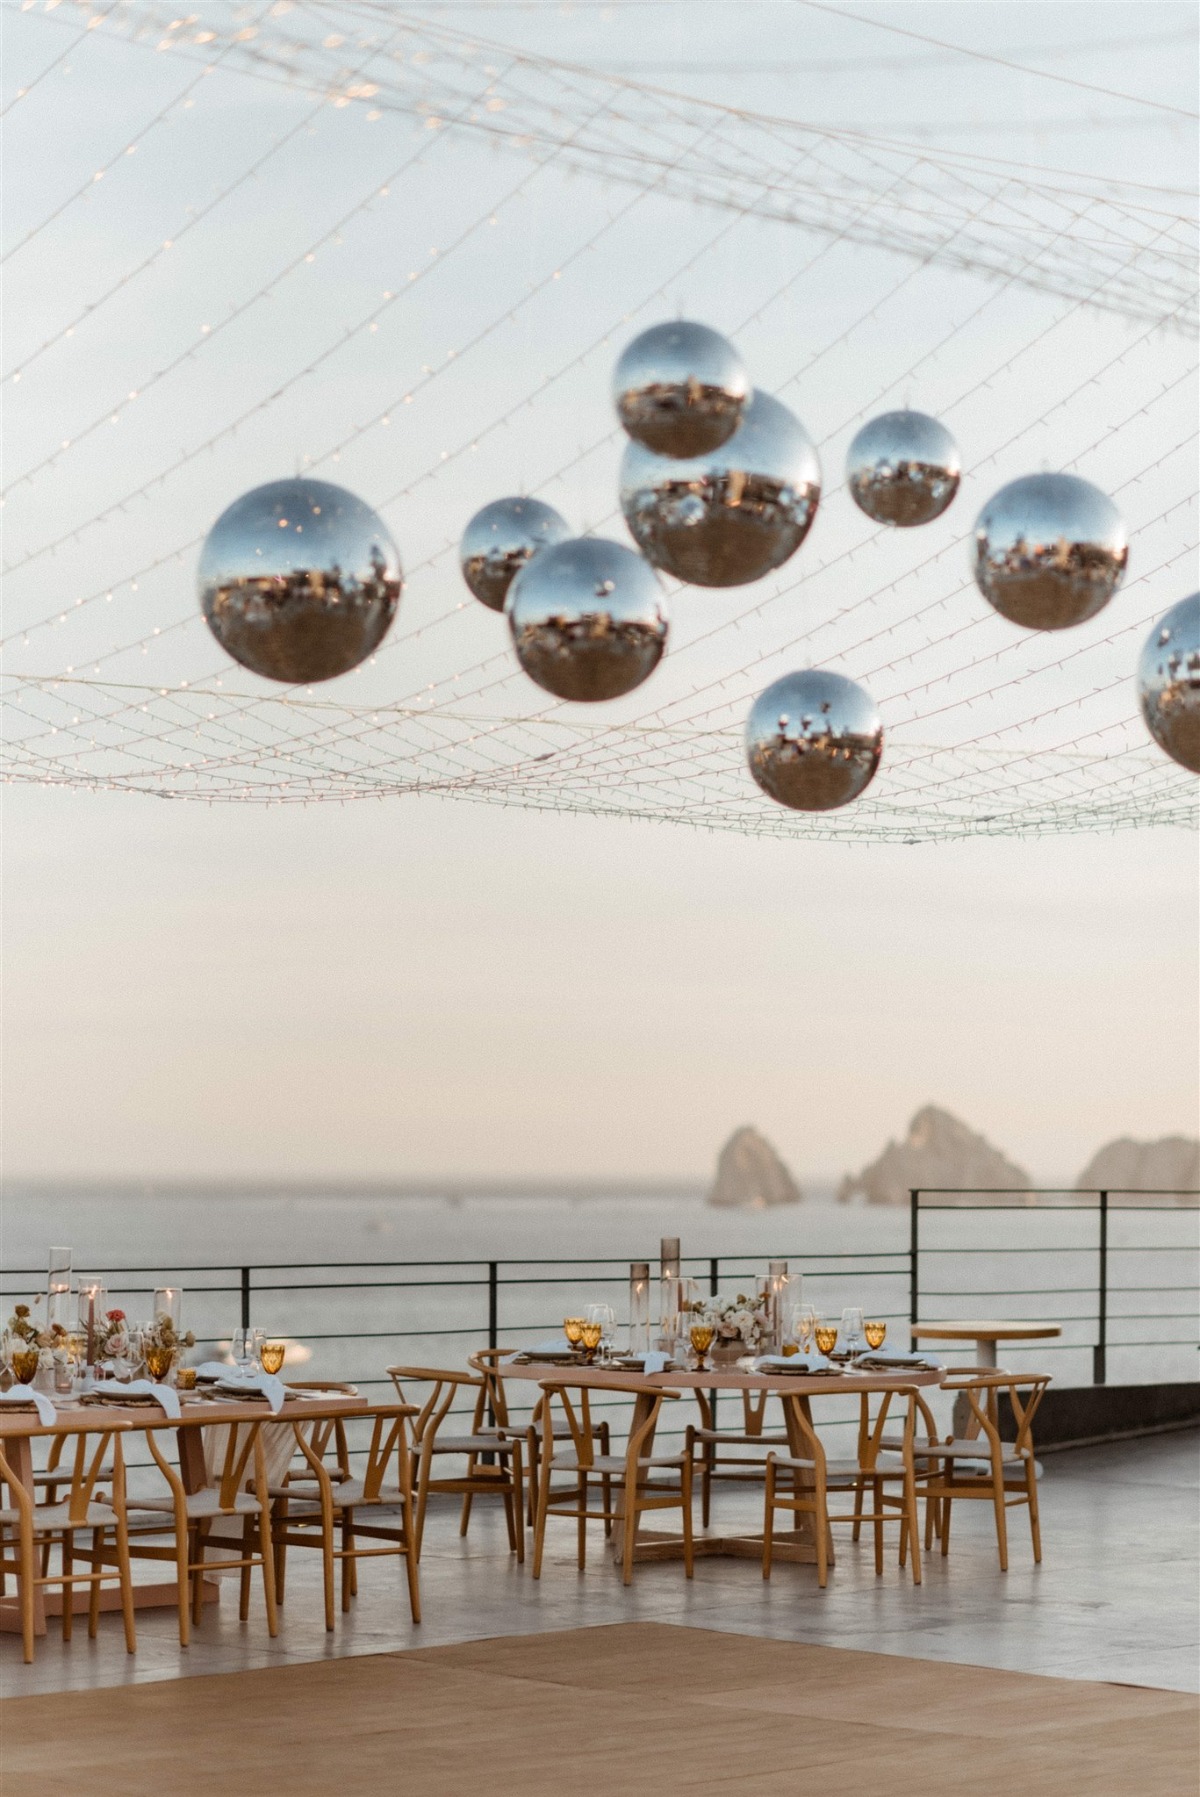 disco ball and twinkle light outdoor wedding decor